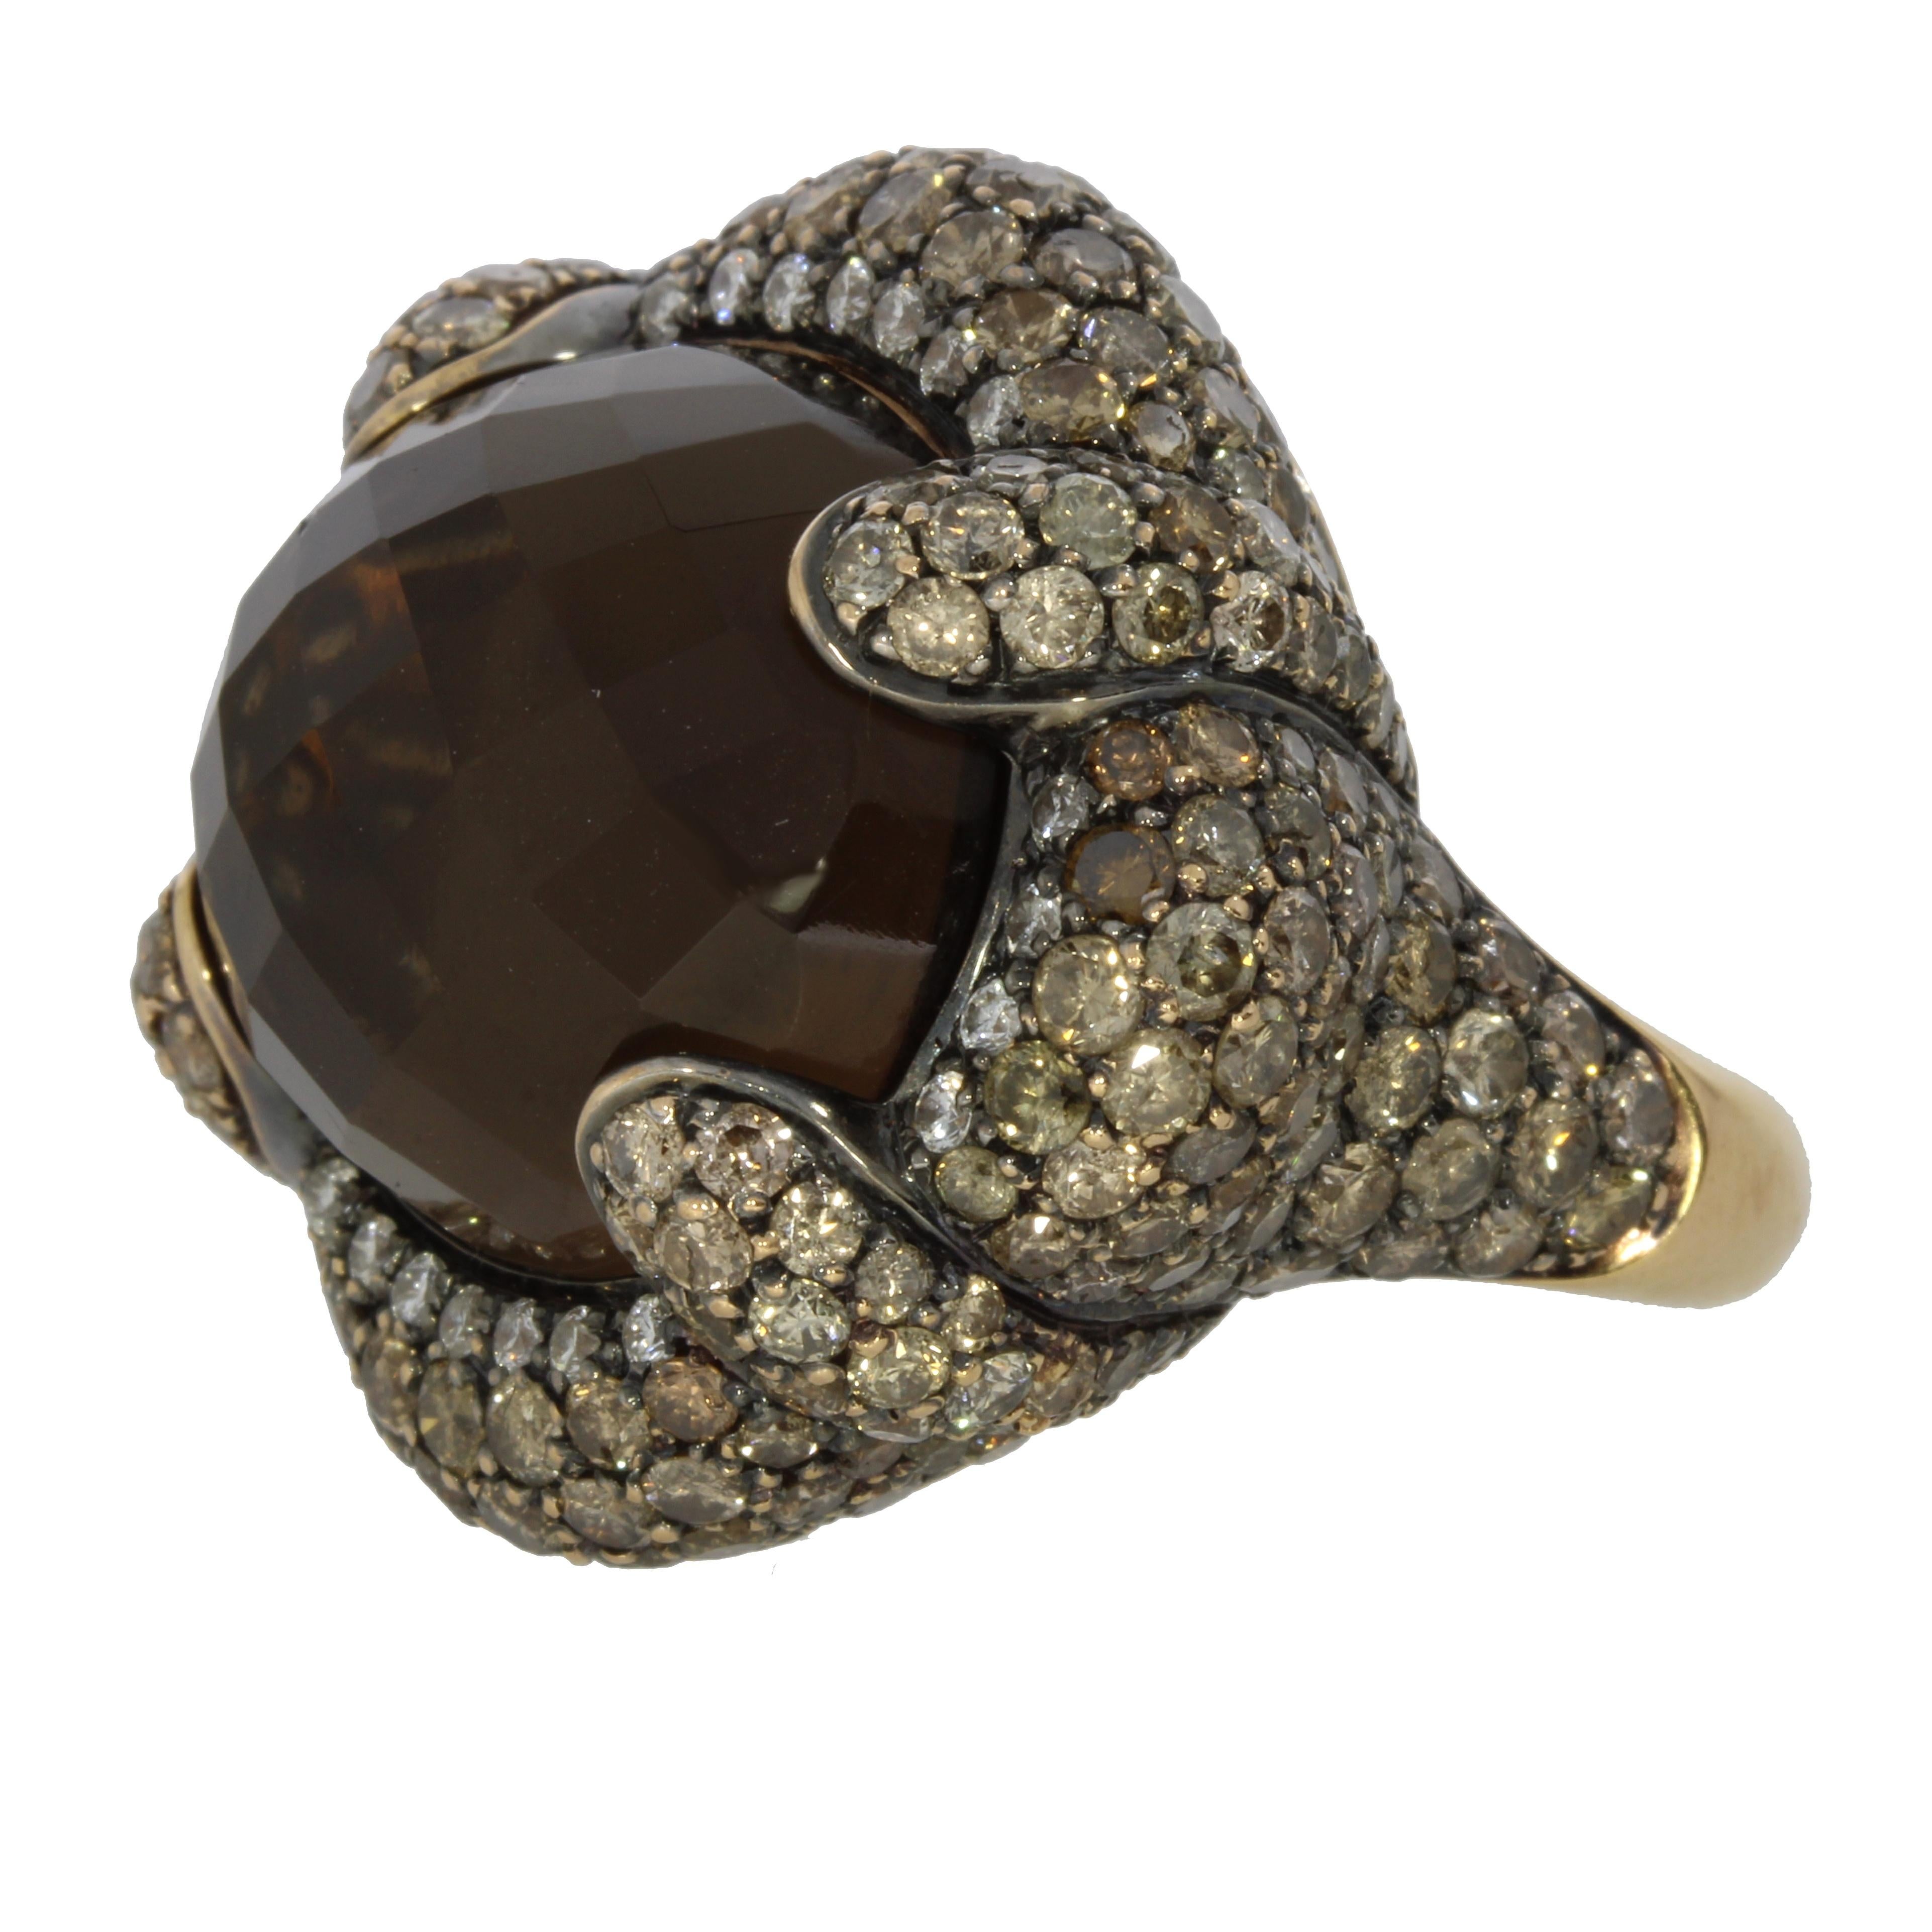 A faceted smokey quartz cabochon sumptuously nestled amongst a pave setting of elegant brown and white brilliant cut diamonds.

Venice Ring Details:
18 Karat Yellow Gold
47.64 Carat Chaker Cut Smokey Quartz
7.20 Carat Brown Diamonds
1.13 White